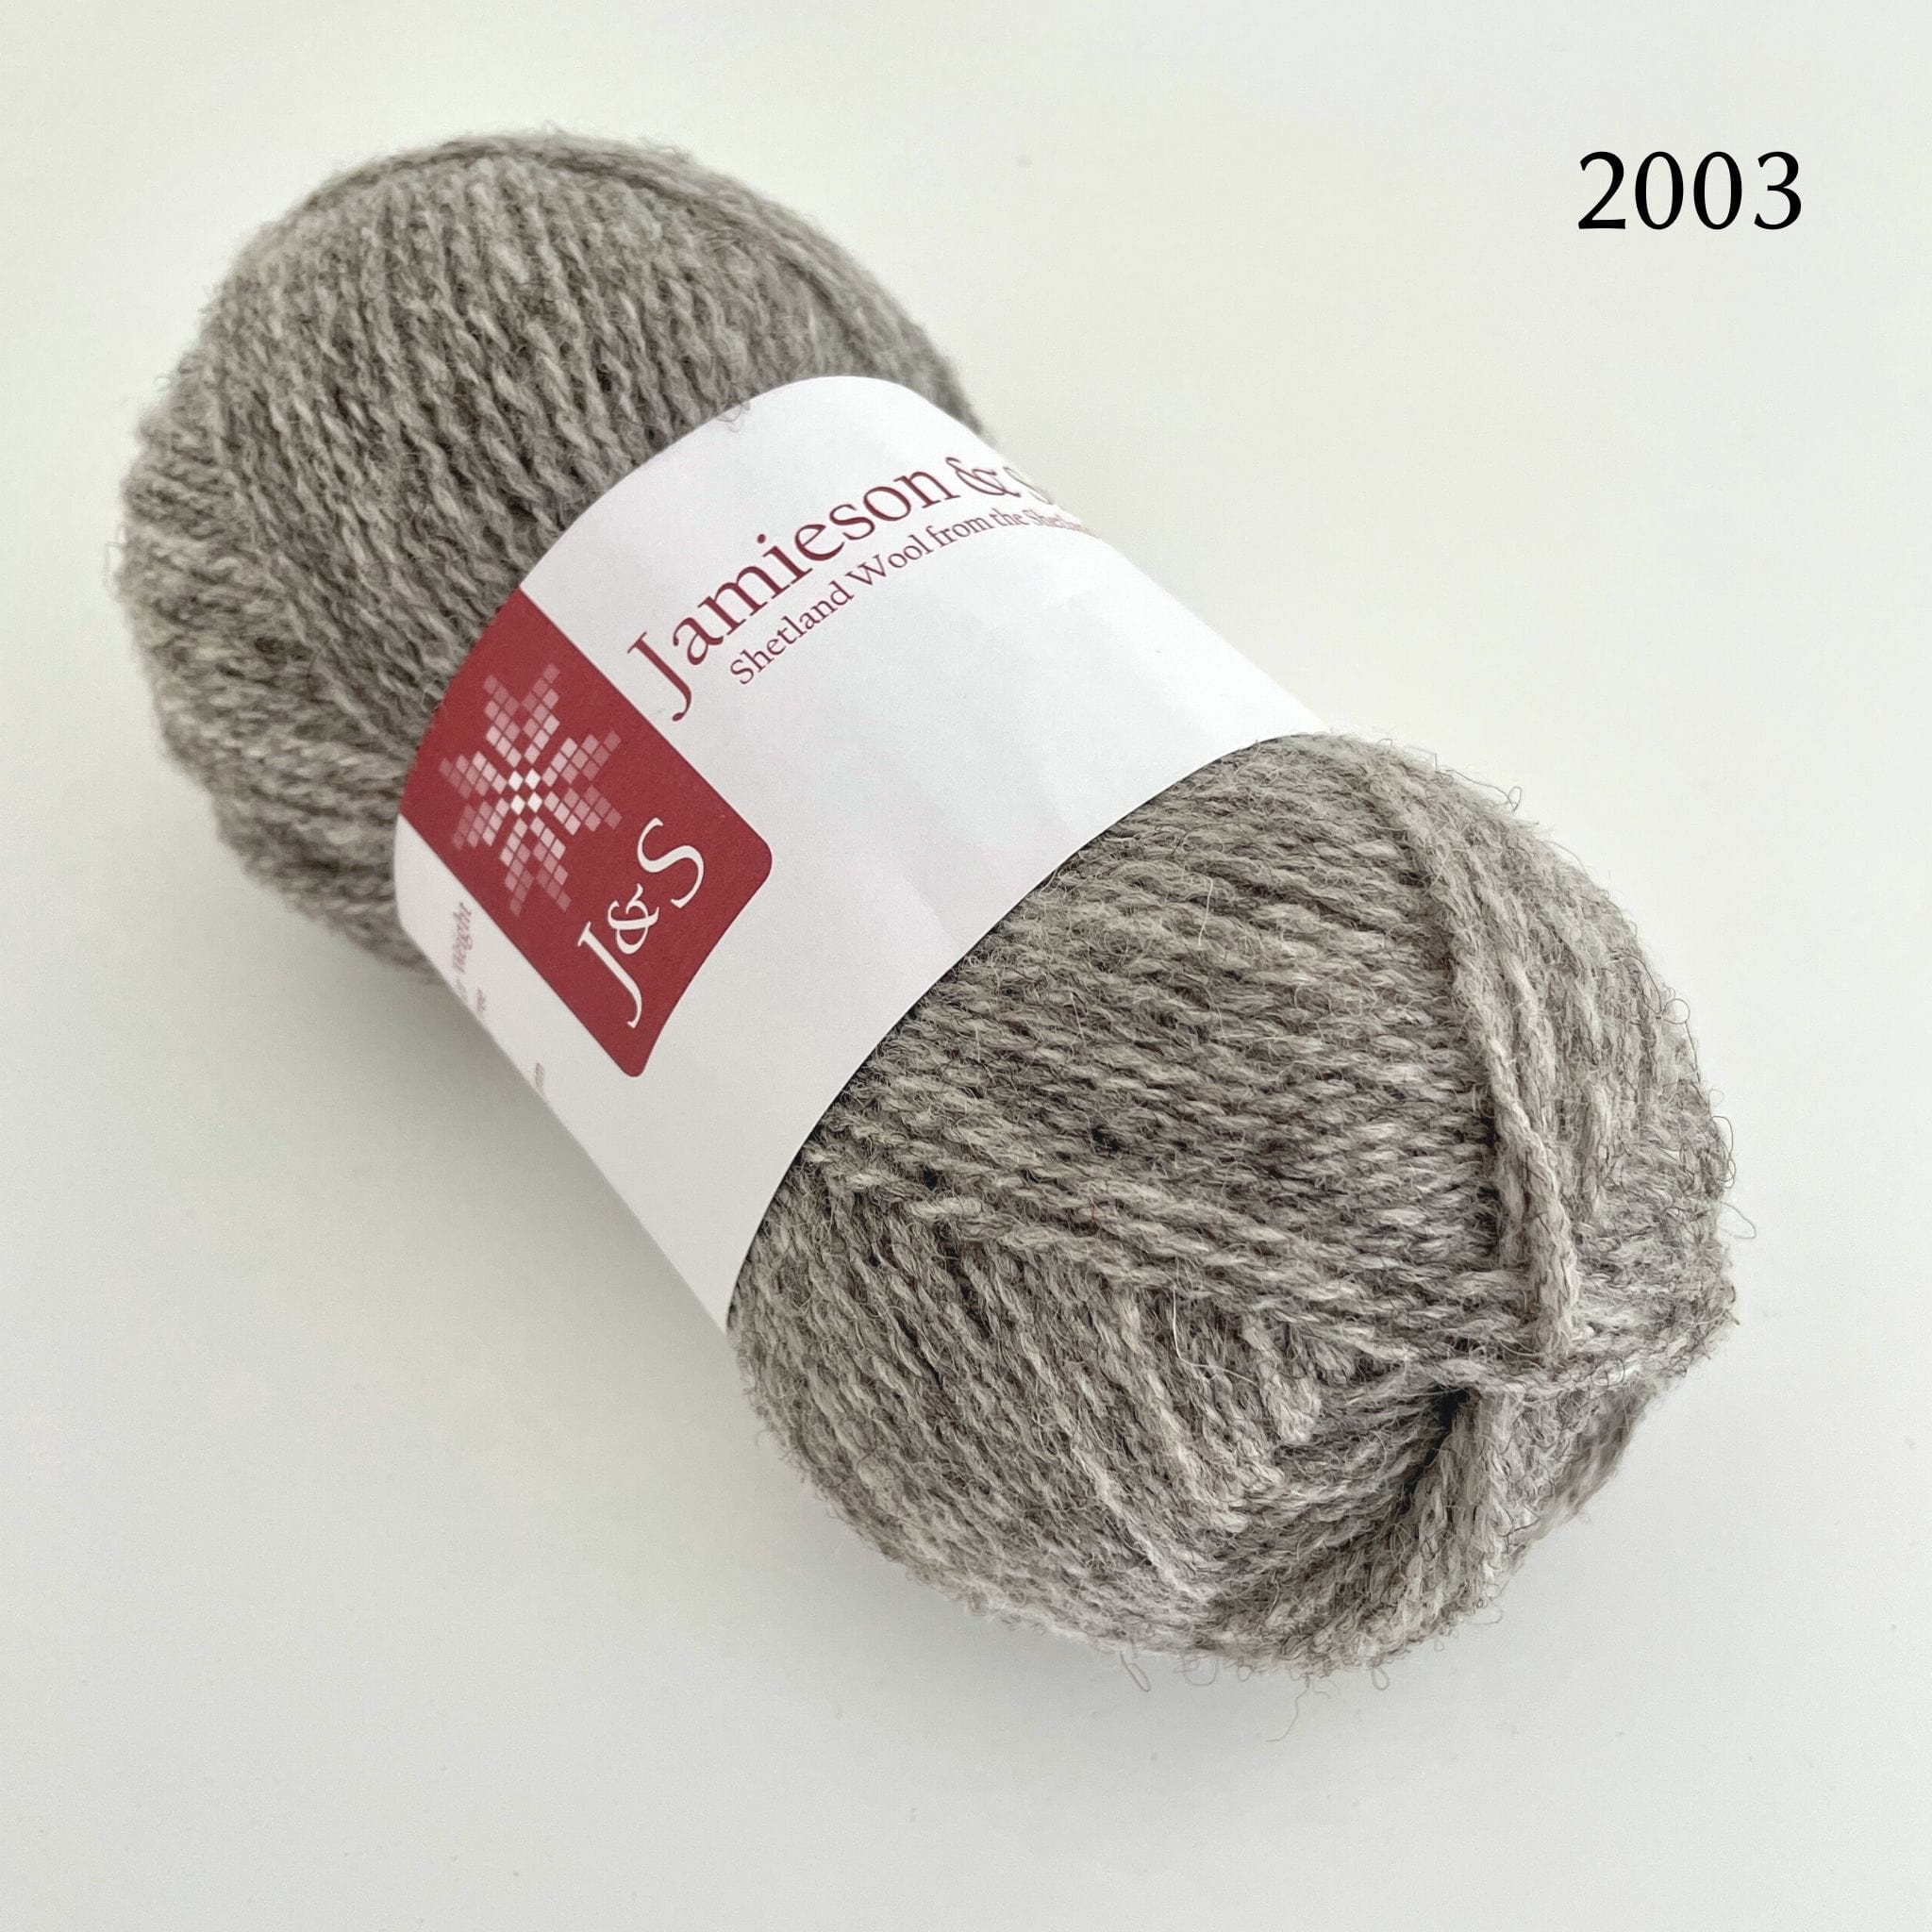 A ball of Jamieson & Smith Shetland Supreme, a fingering weight wool yarn, in color 2003, a light grey